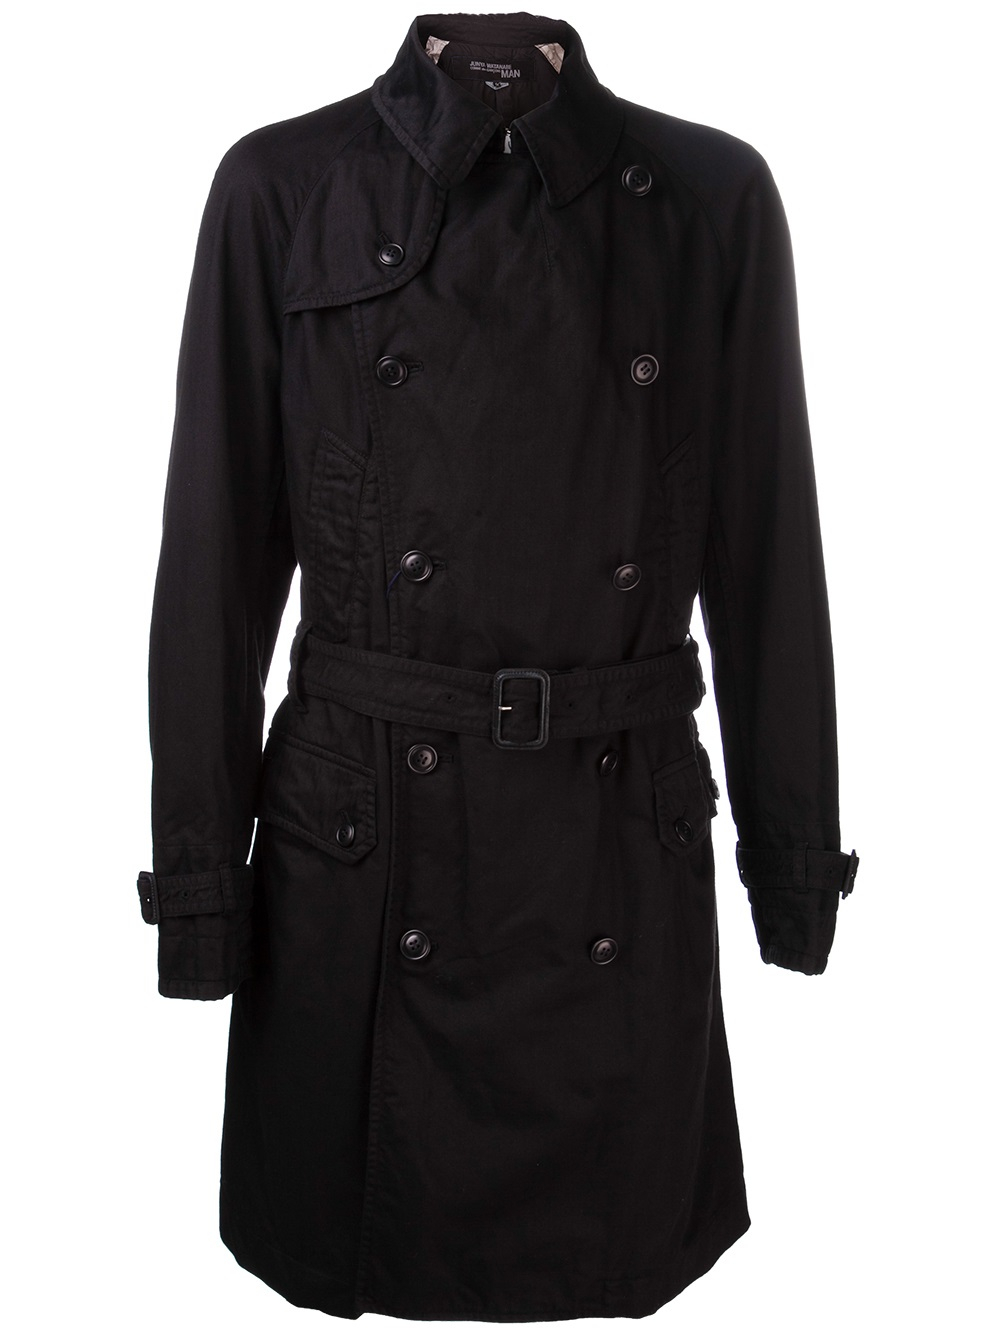 Junya Watanabe Double Breasted Trench Coat in Black for Men - Lyst